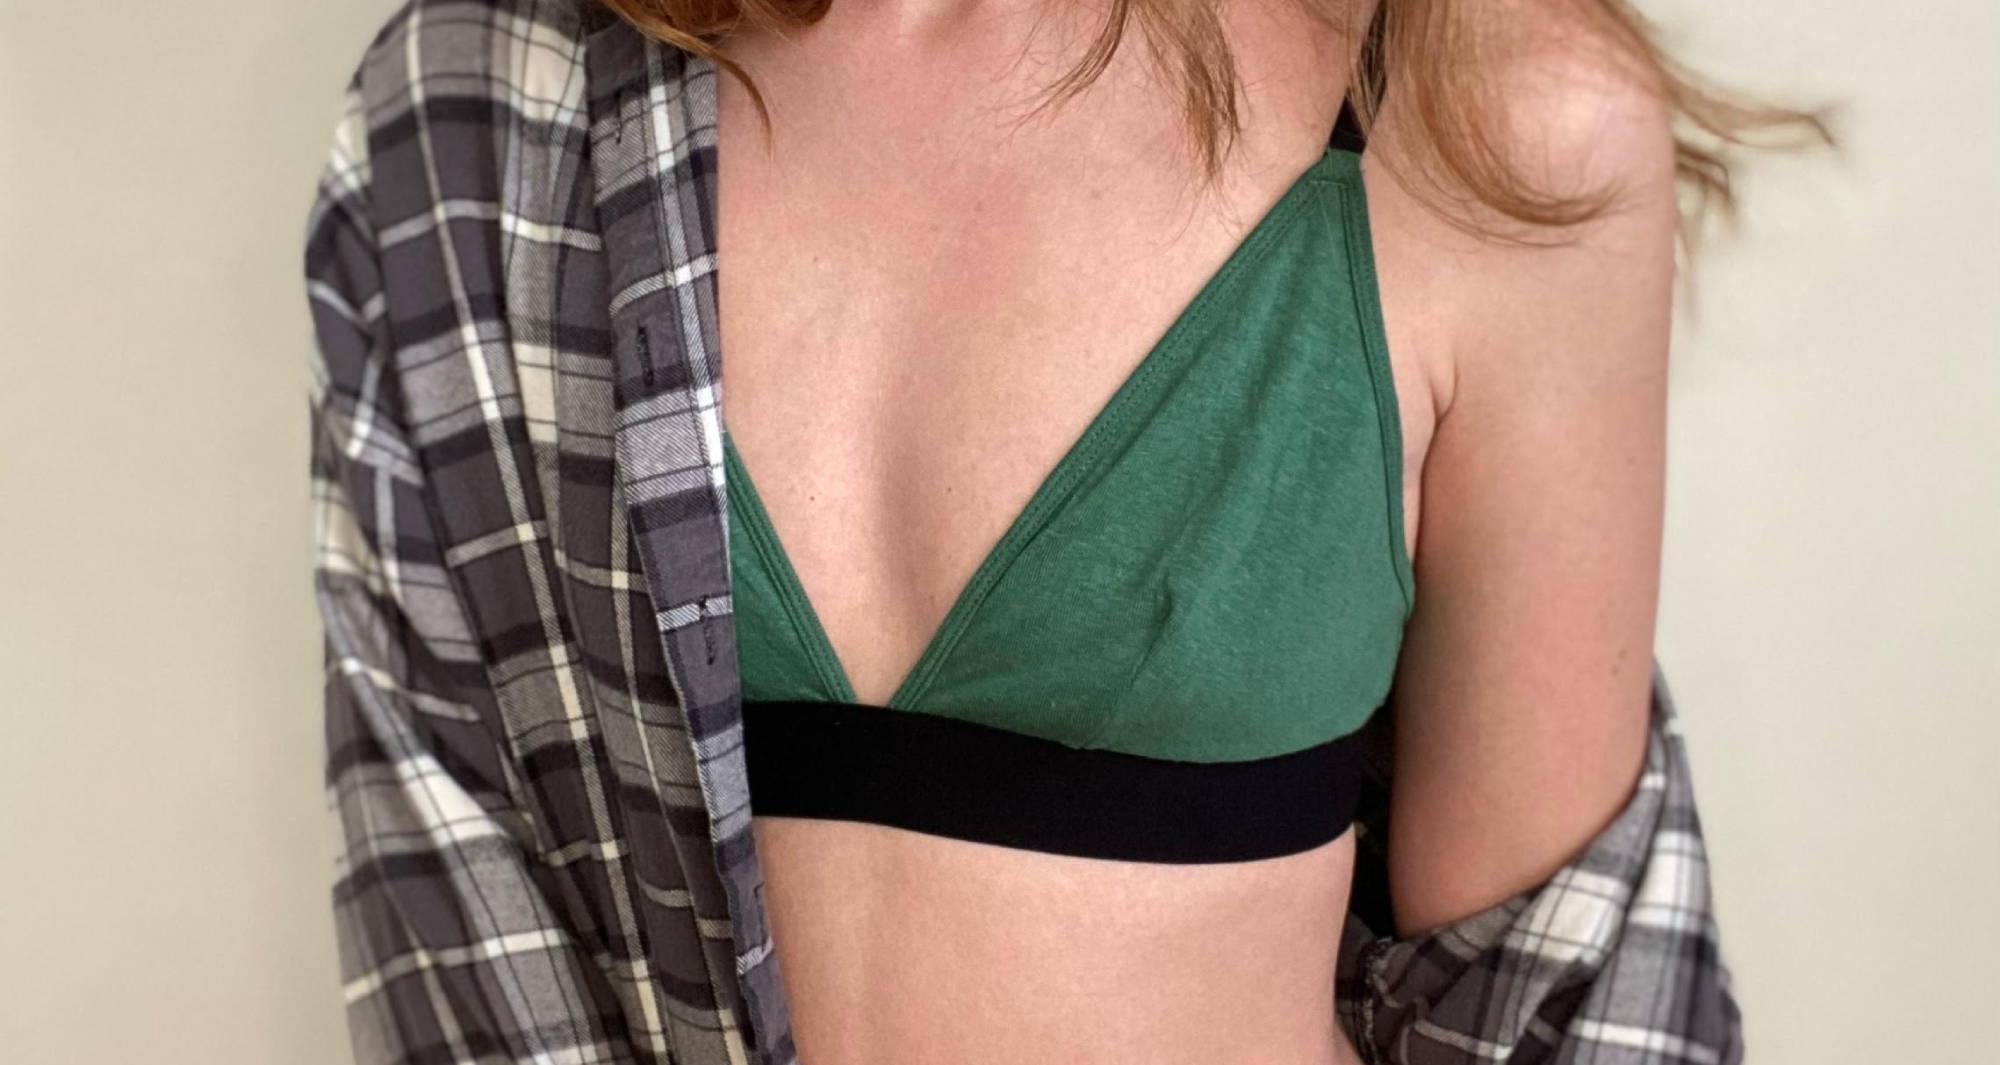  Torso of a woman with red hair wearing a green bralette and an unbuttoned gray plaid shirt